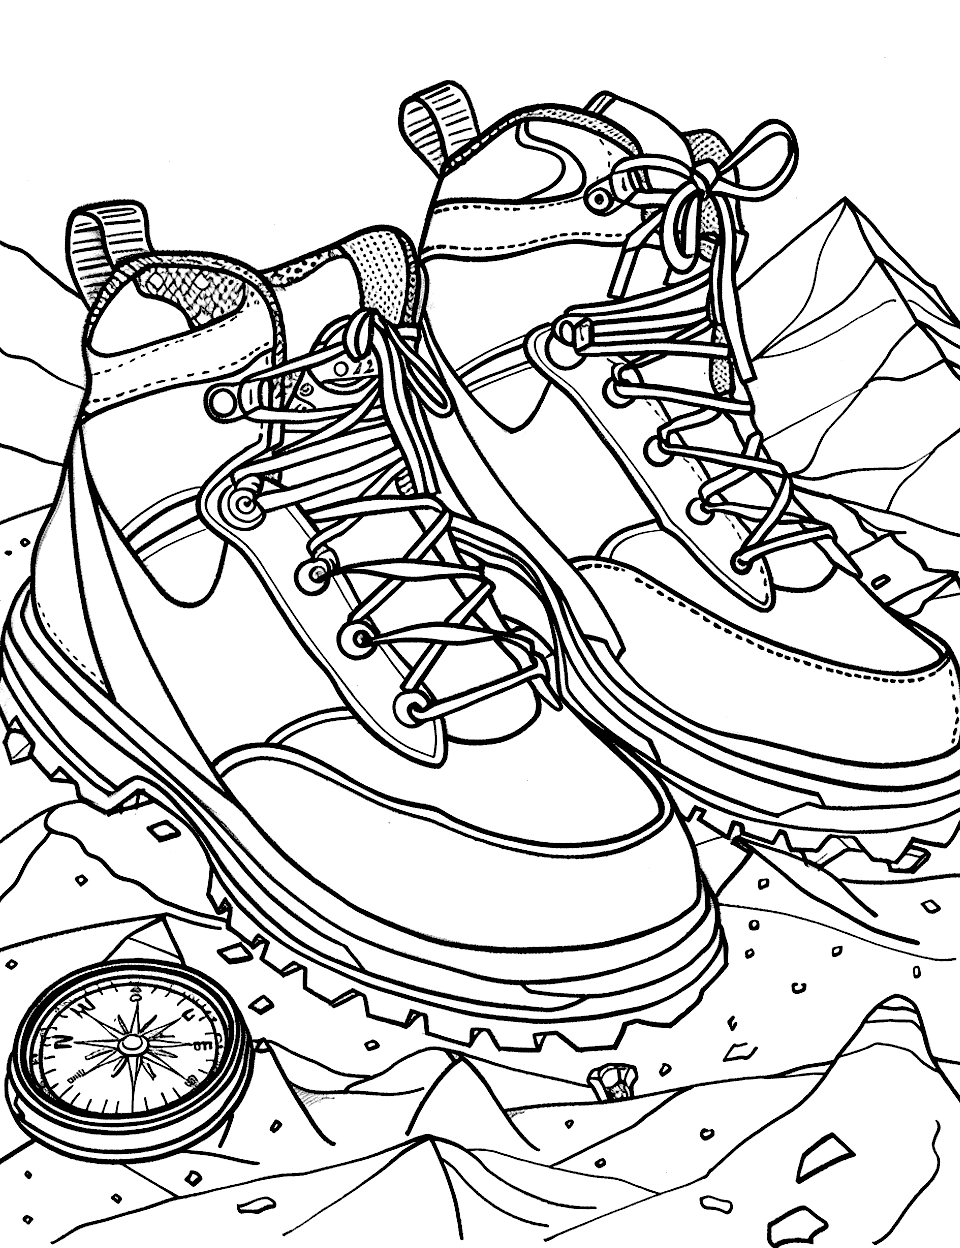 Mountaineering Boots with a View Shoe Coloring Page - Heavy-duty mountaineering boots with a compass and a snowy peak in the distance.